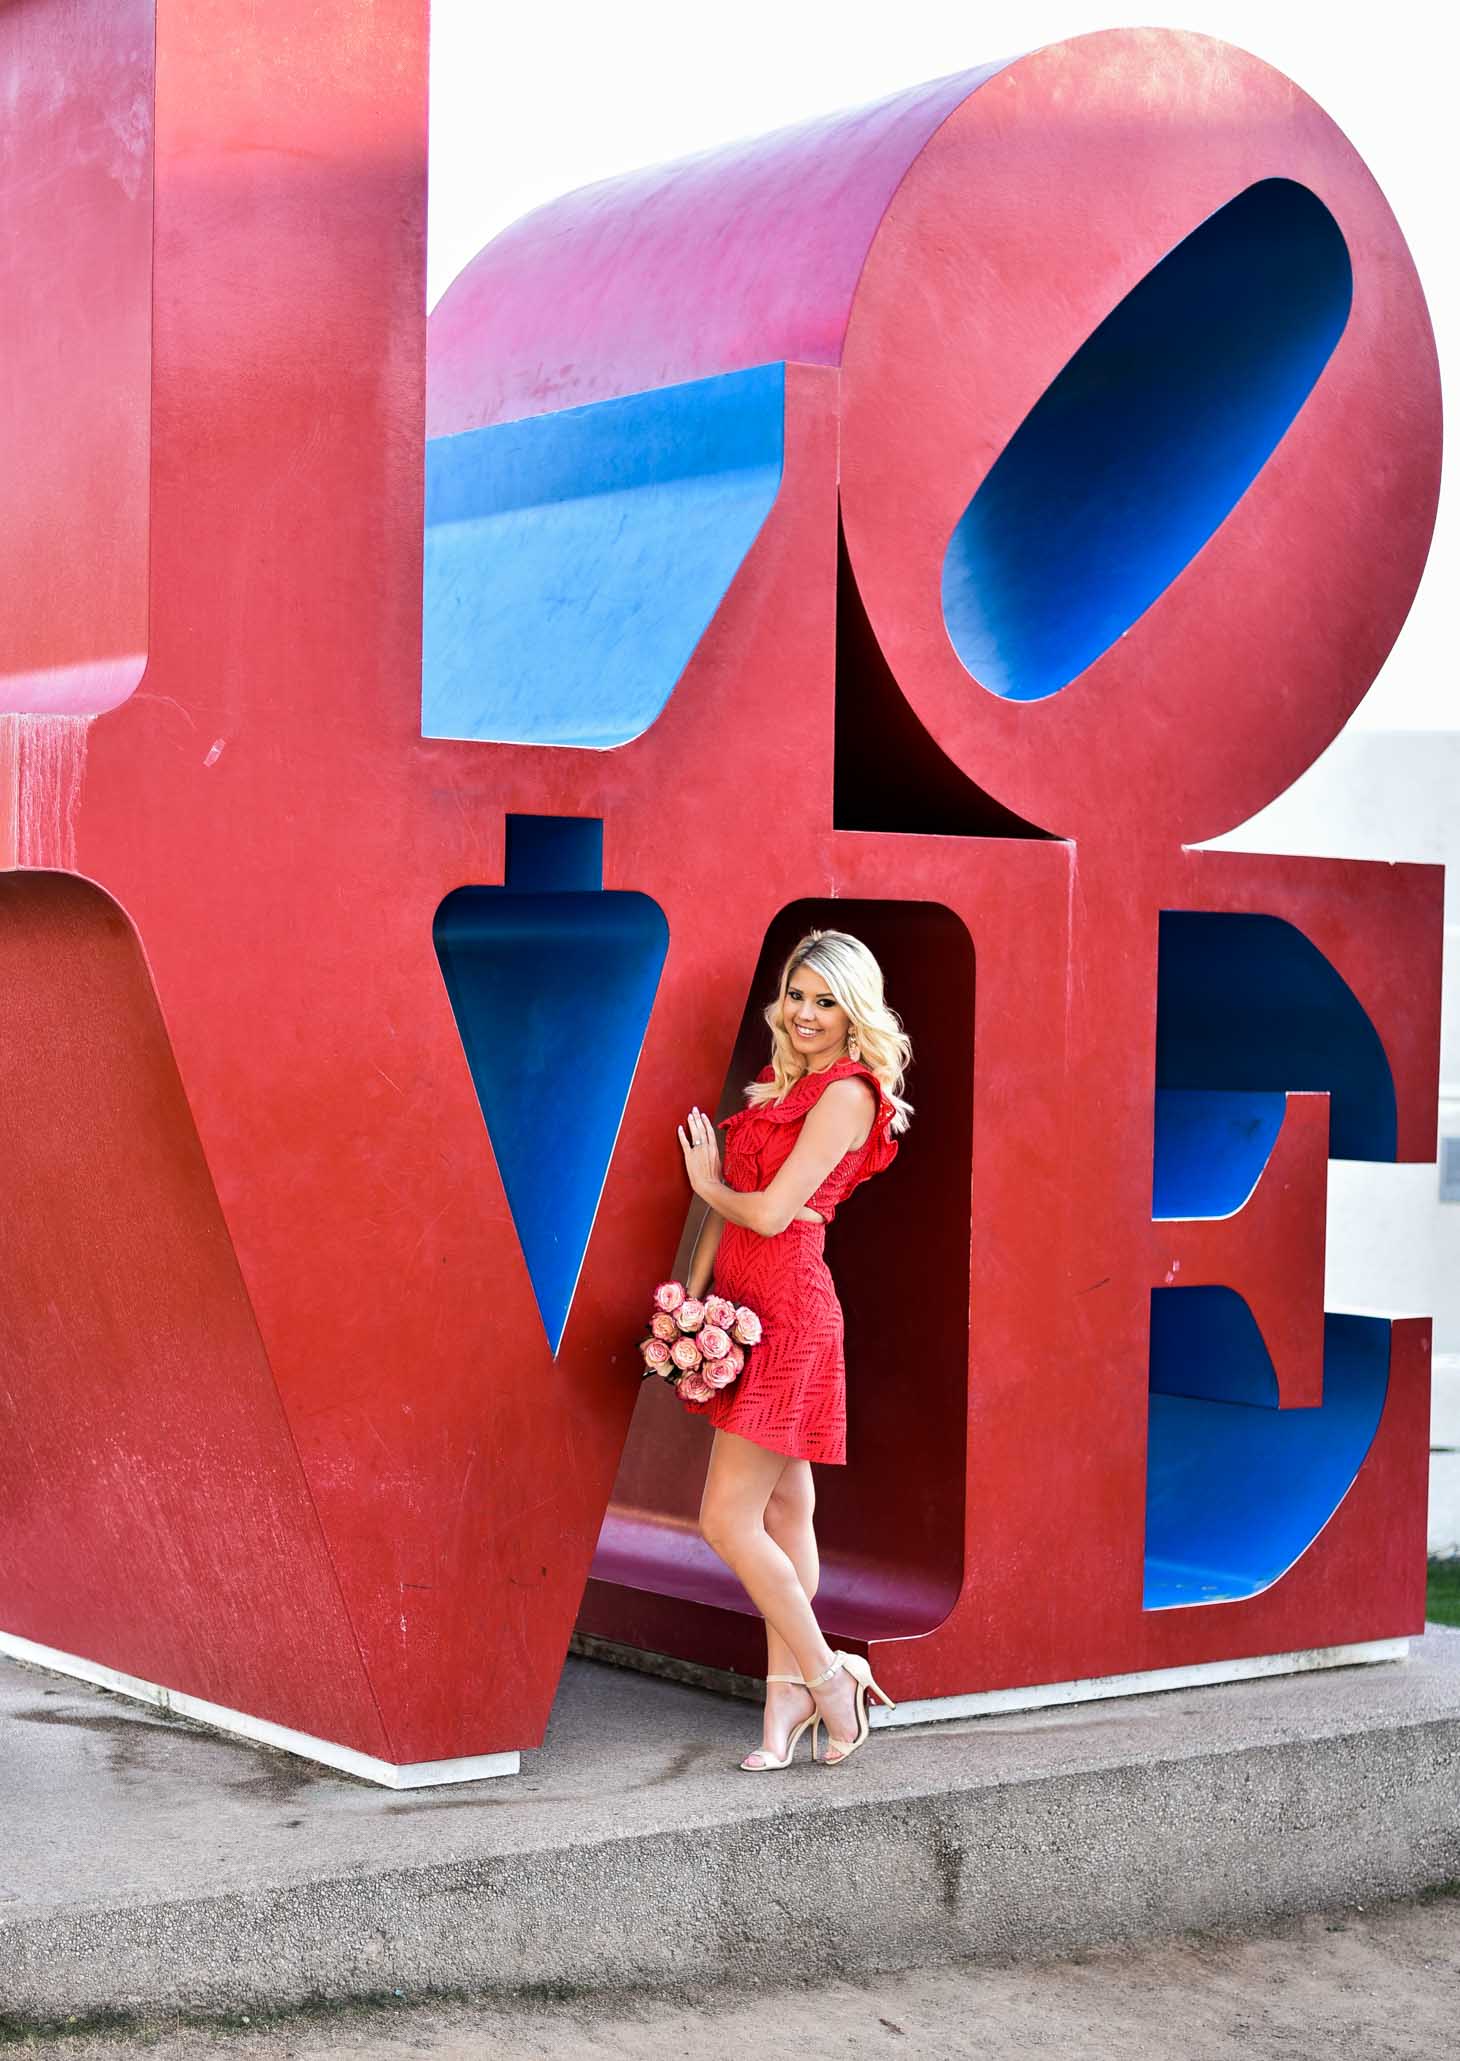 Erin Elizabeth of Wink and a Twirl in Red Dress For Valentine's Day